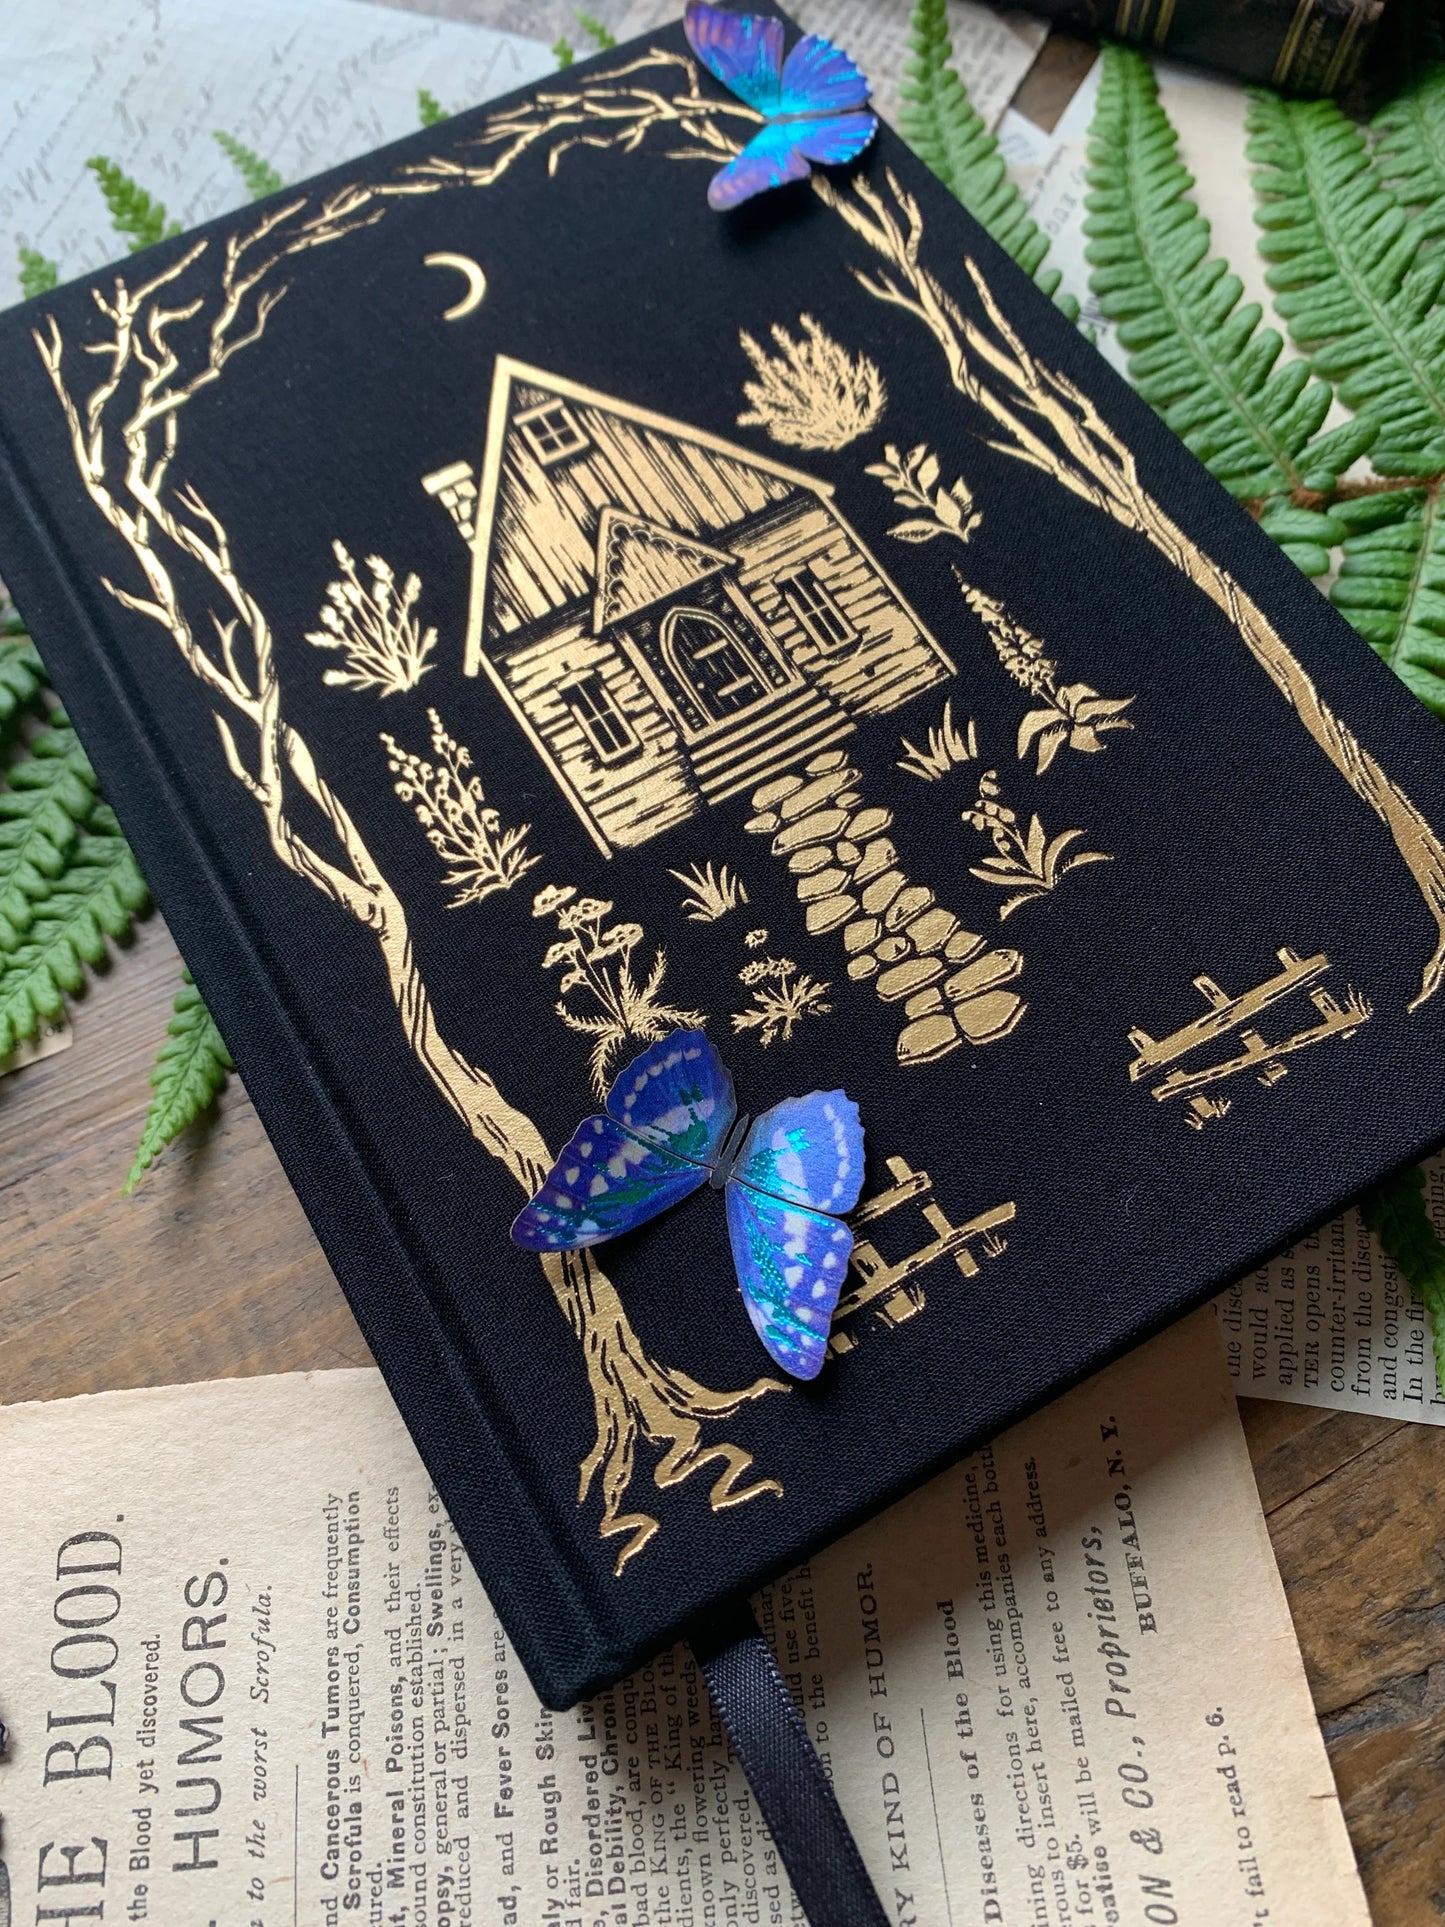 The Creeping Moon "The Grimoire" Notebook